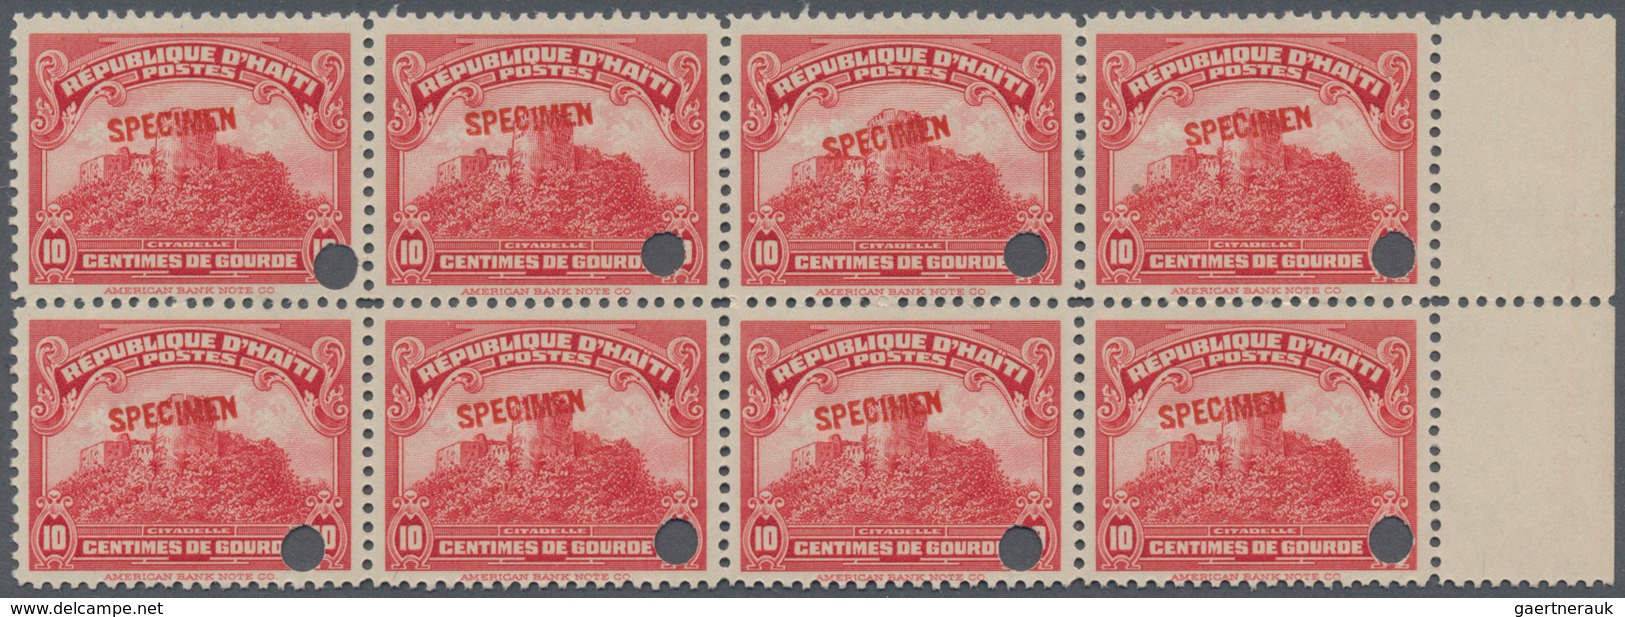 Haiti: 1924, Definitive Issue 10c. Carmine-rose 'St. Christopher Citadel' With Punch Hole And Red Op - Haiti